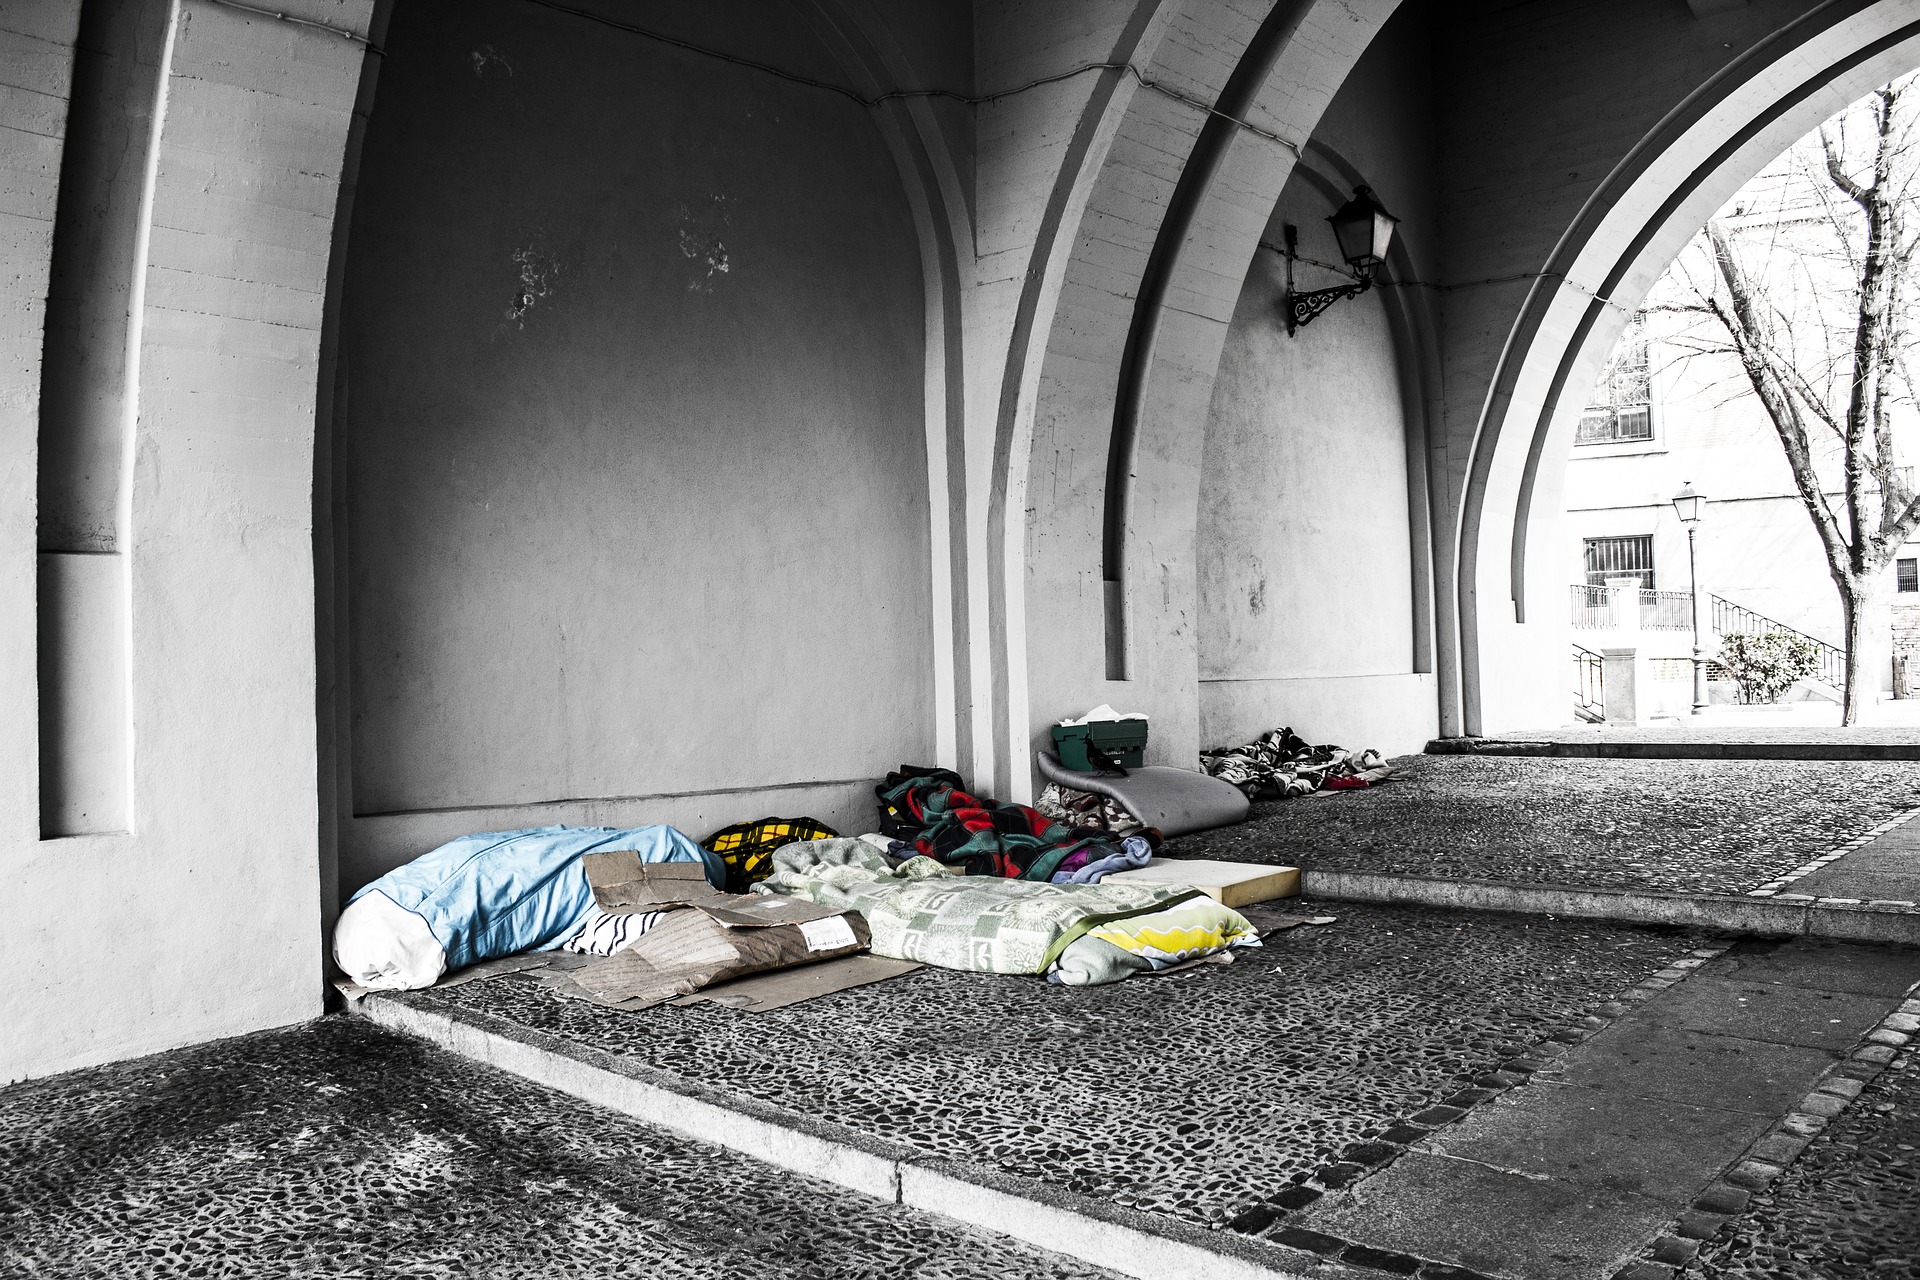 Homeless beds under an archway